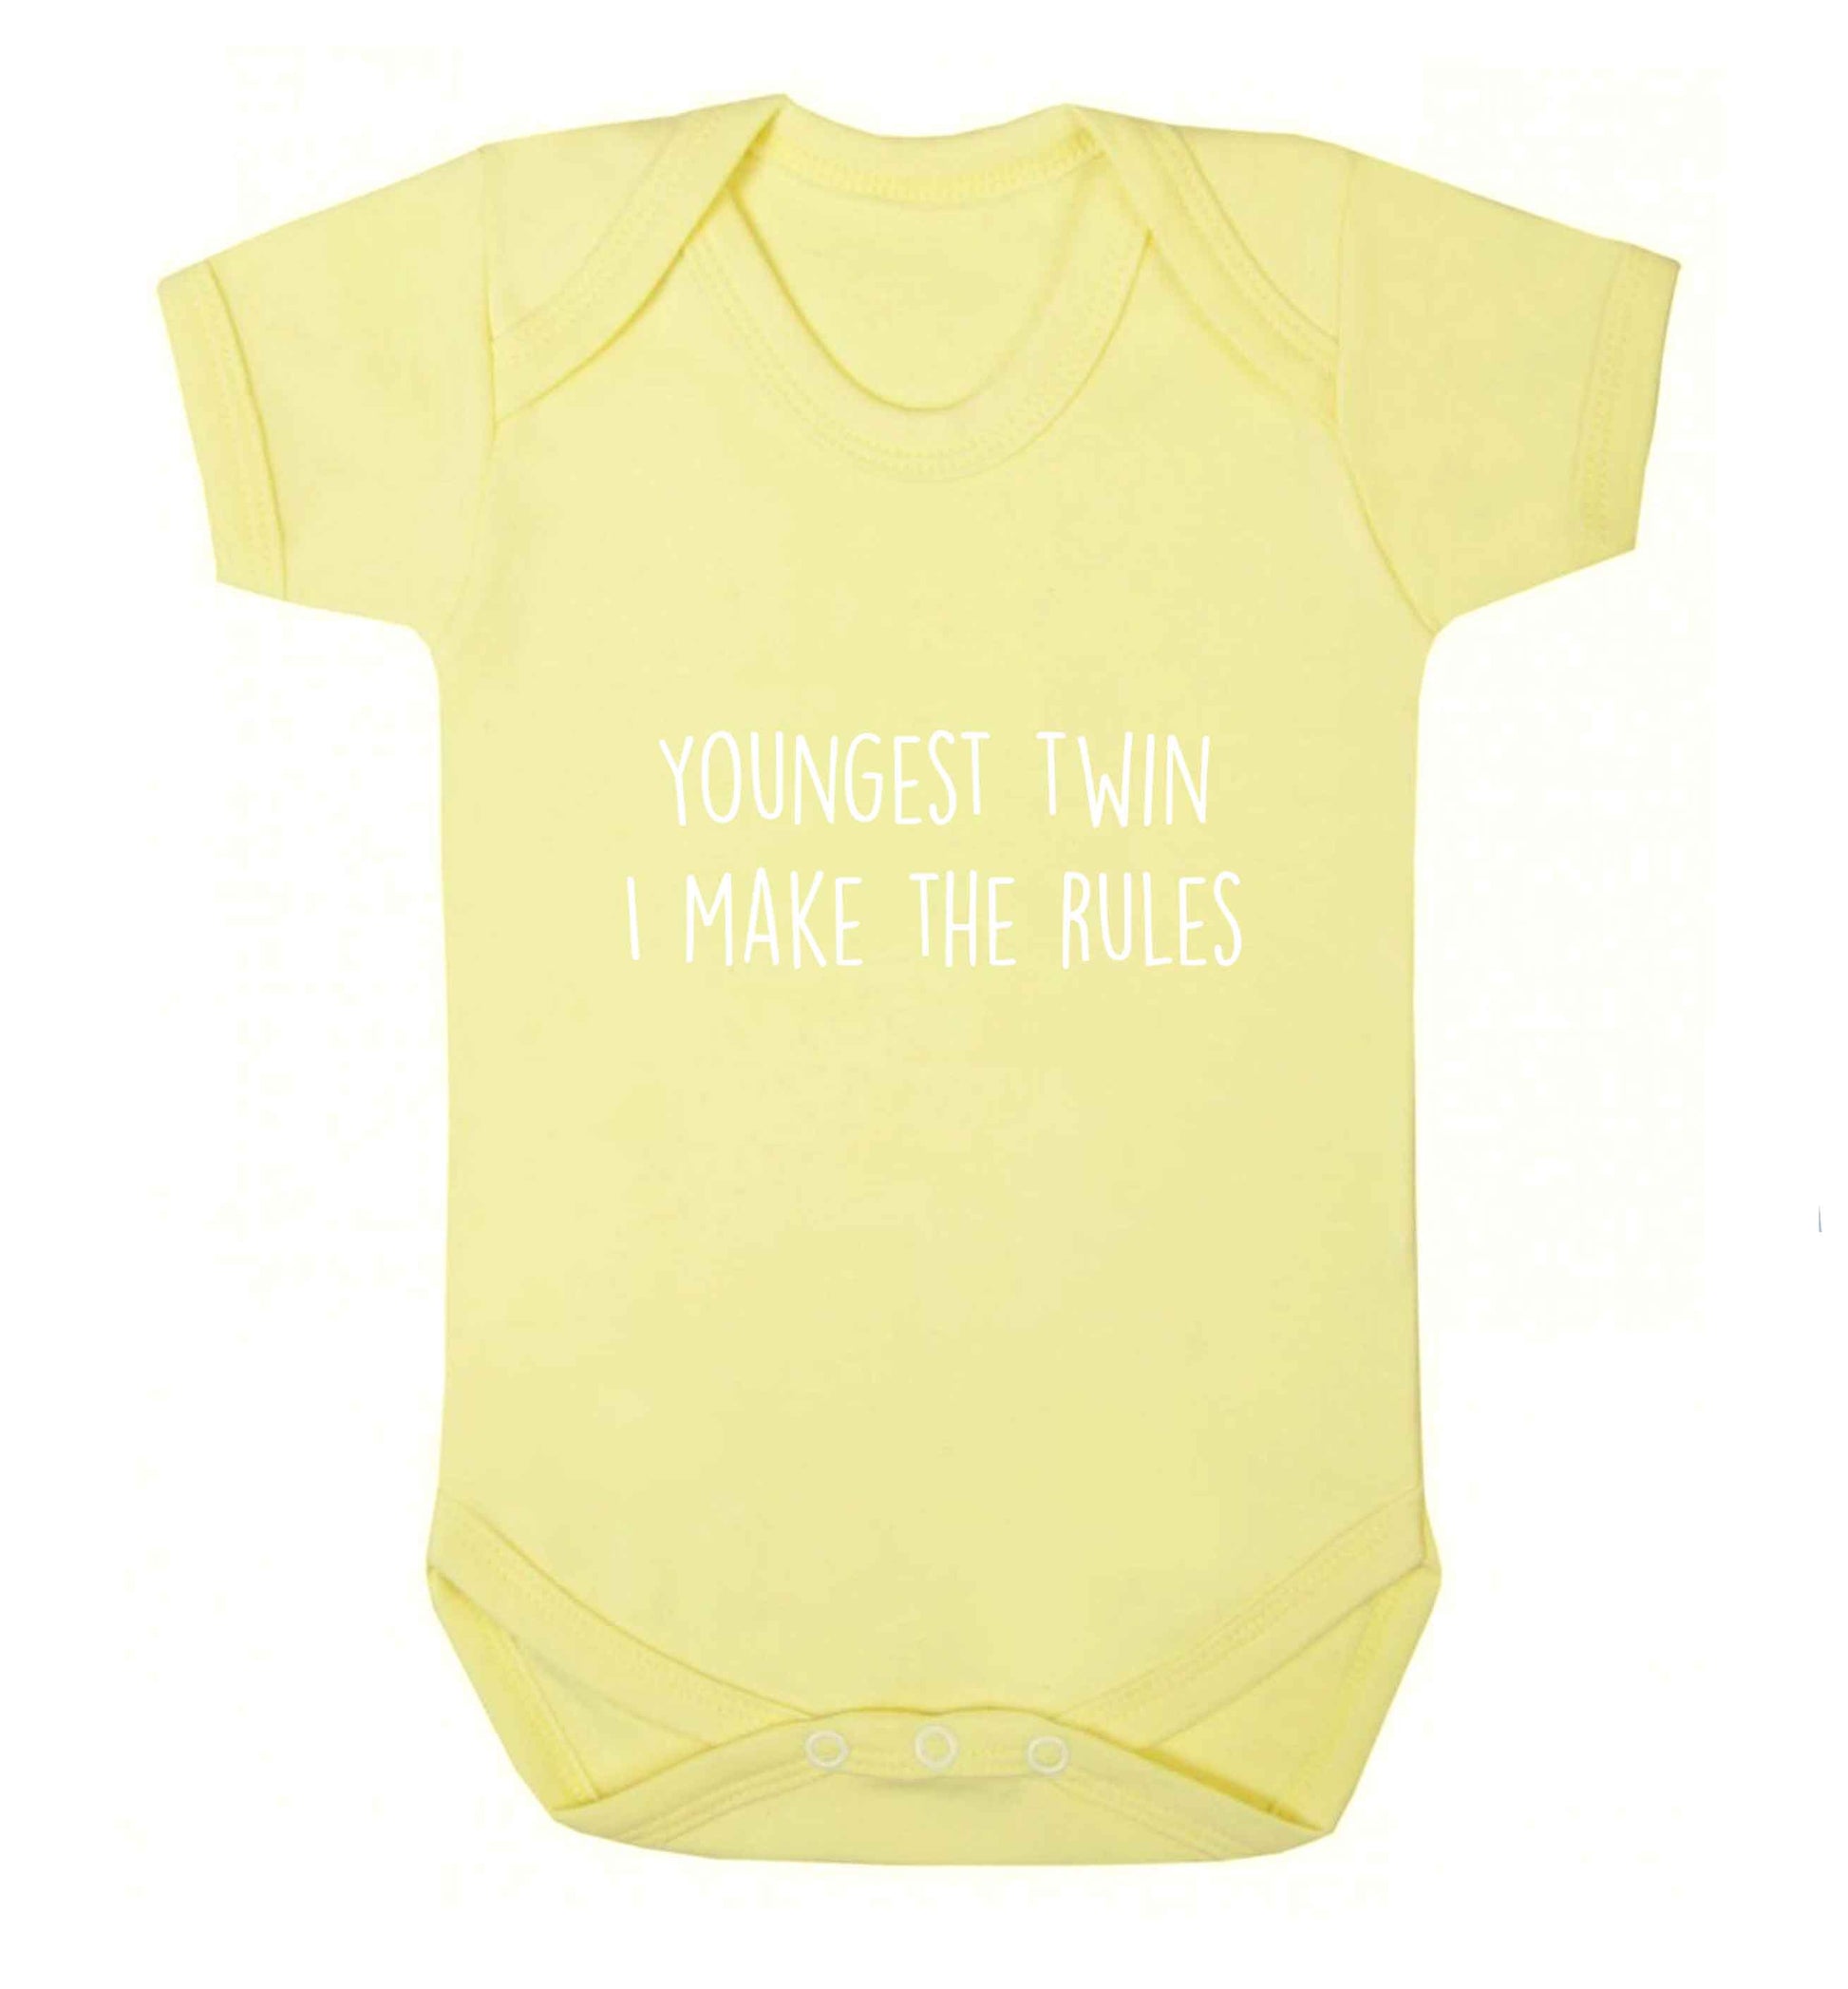 Youngest twin I make the rules baby vest pale yellow 18-24 months